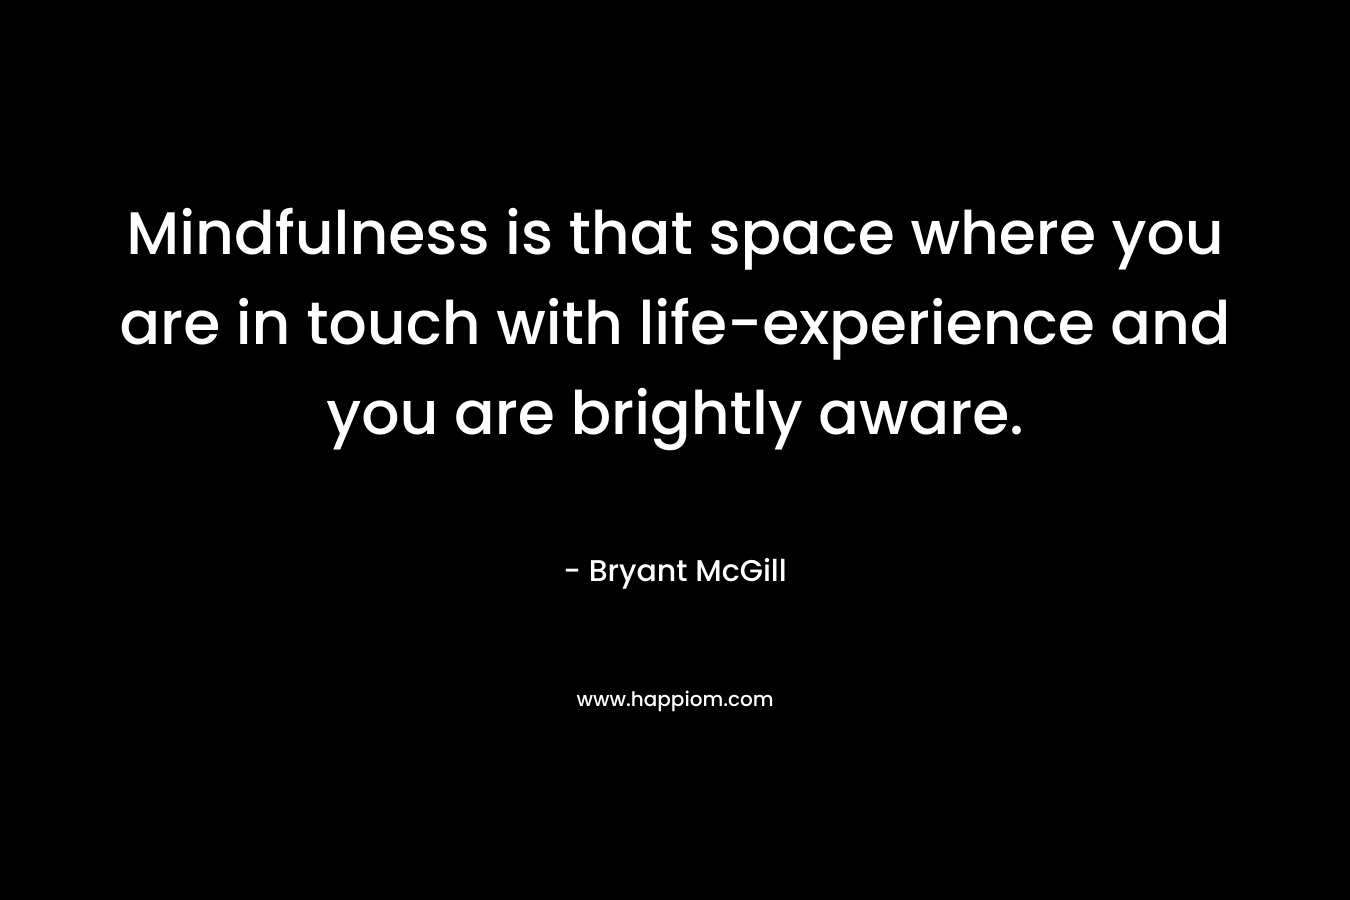 Mindfulness is that space where you are in touch with life-experience and you are brightly aware.